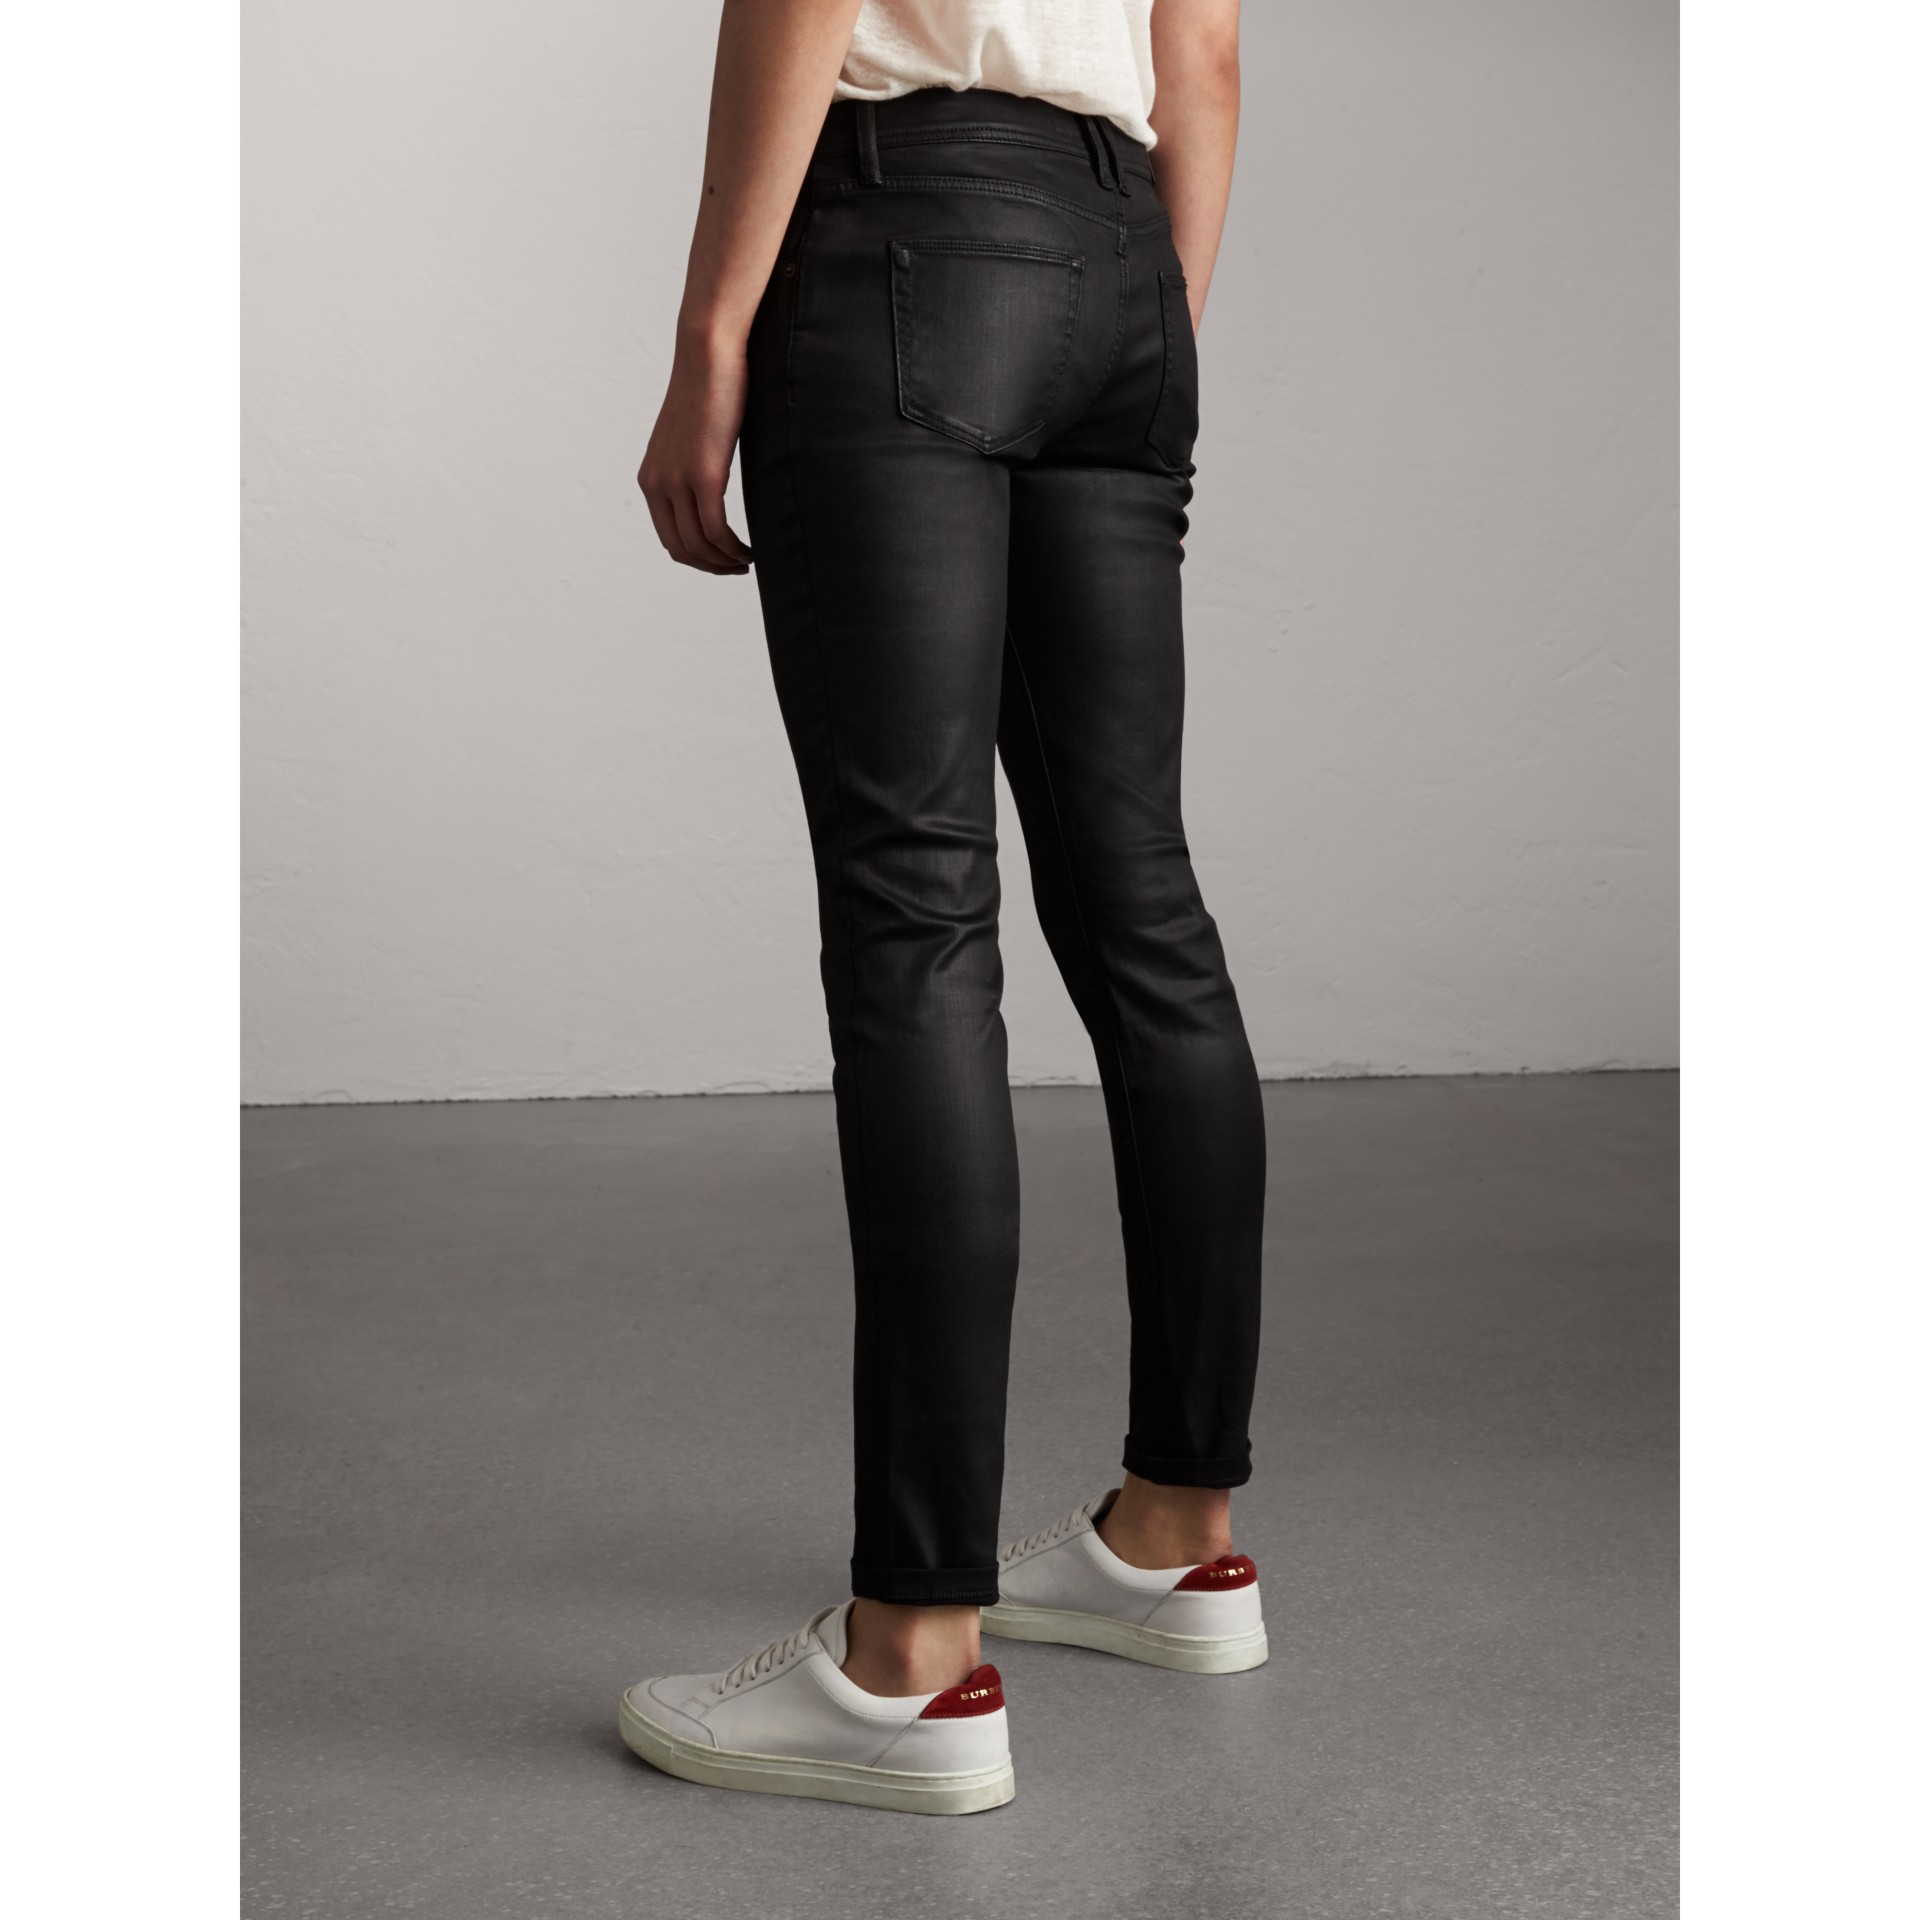 Womens black coated jeans